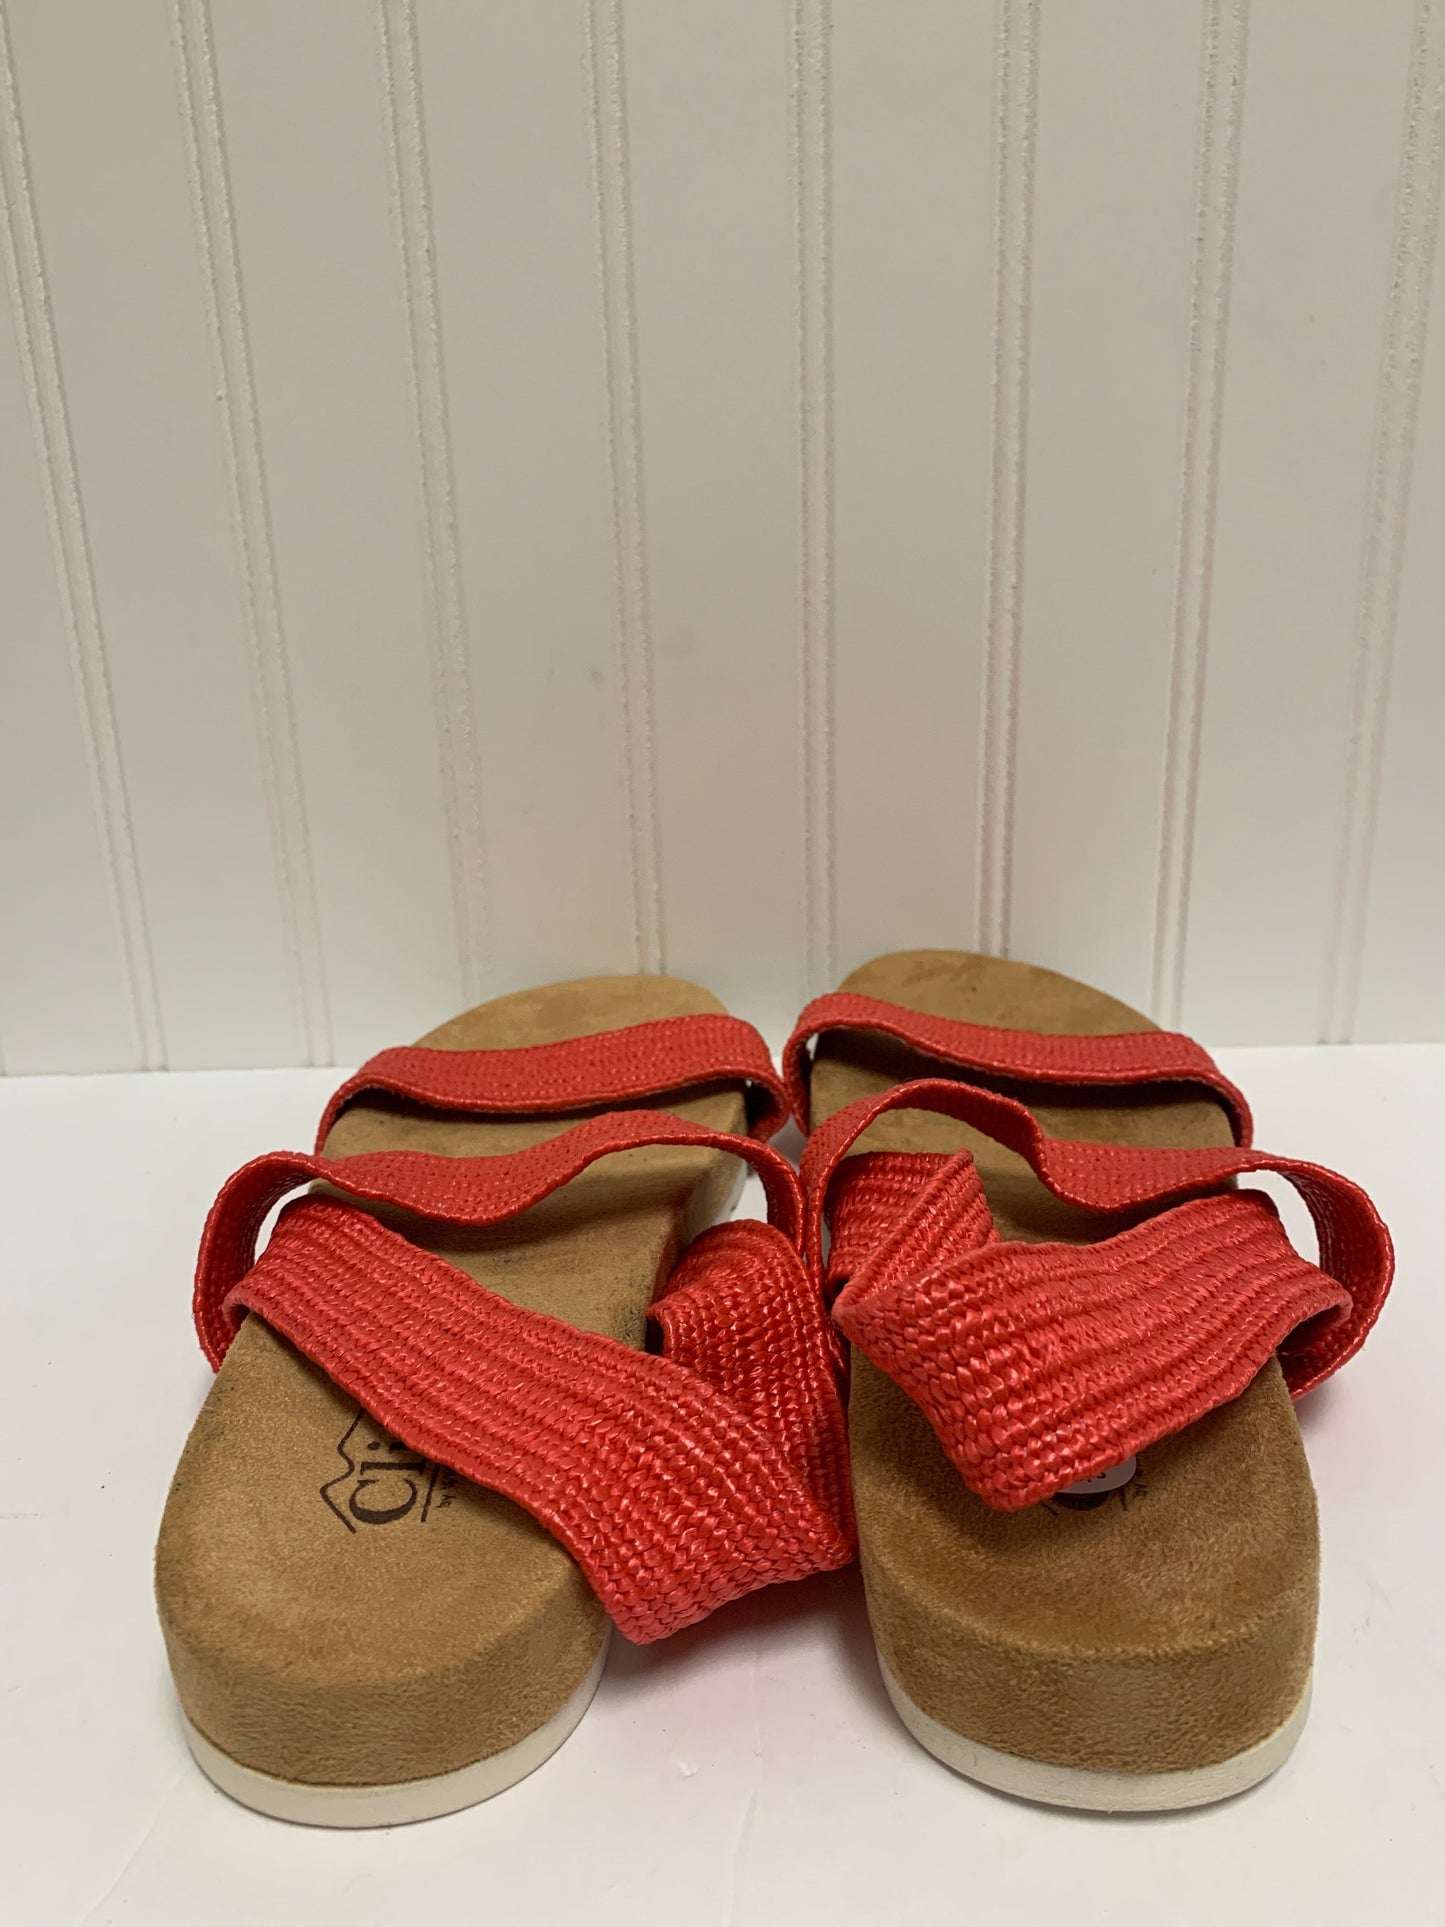 Sandals Flats By White Mountain  Size: 9